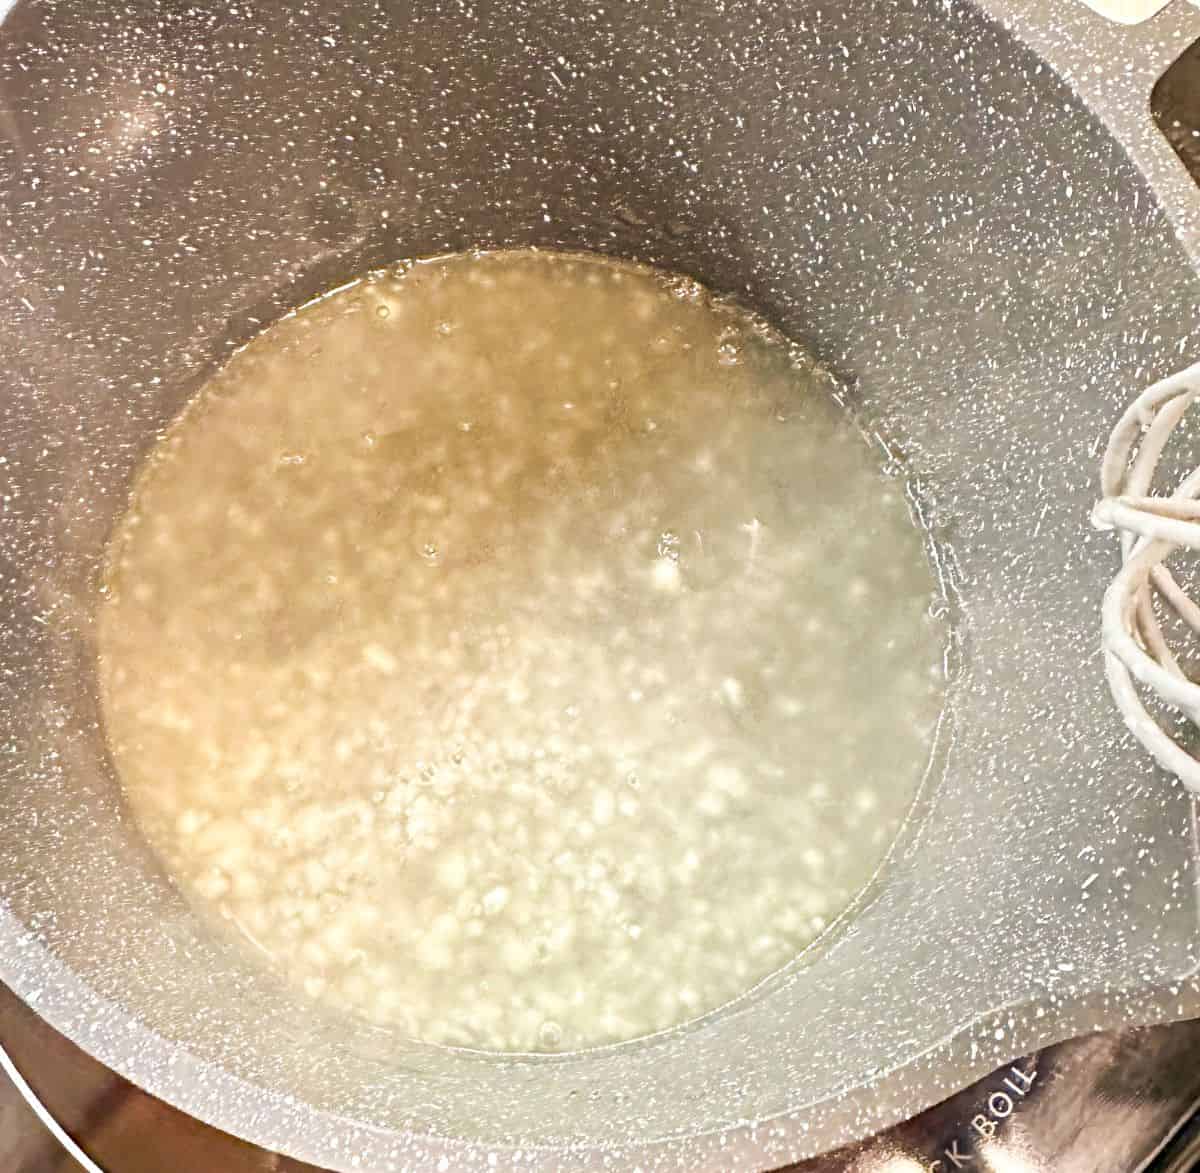 Boiling peach juice in a saucepan being thickened with cornstarch for peach cobbler, with a whisk in view for stirring.